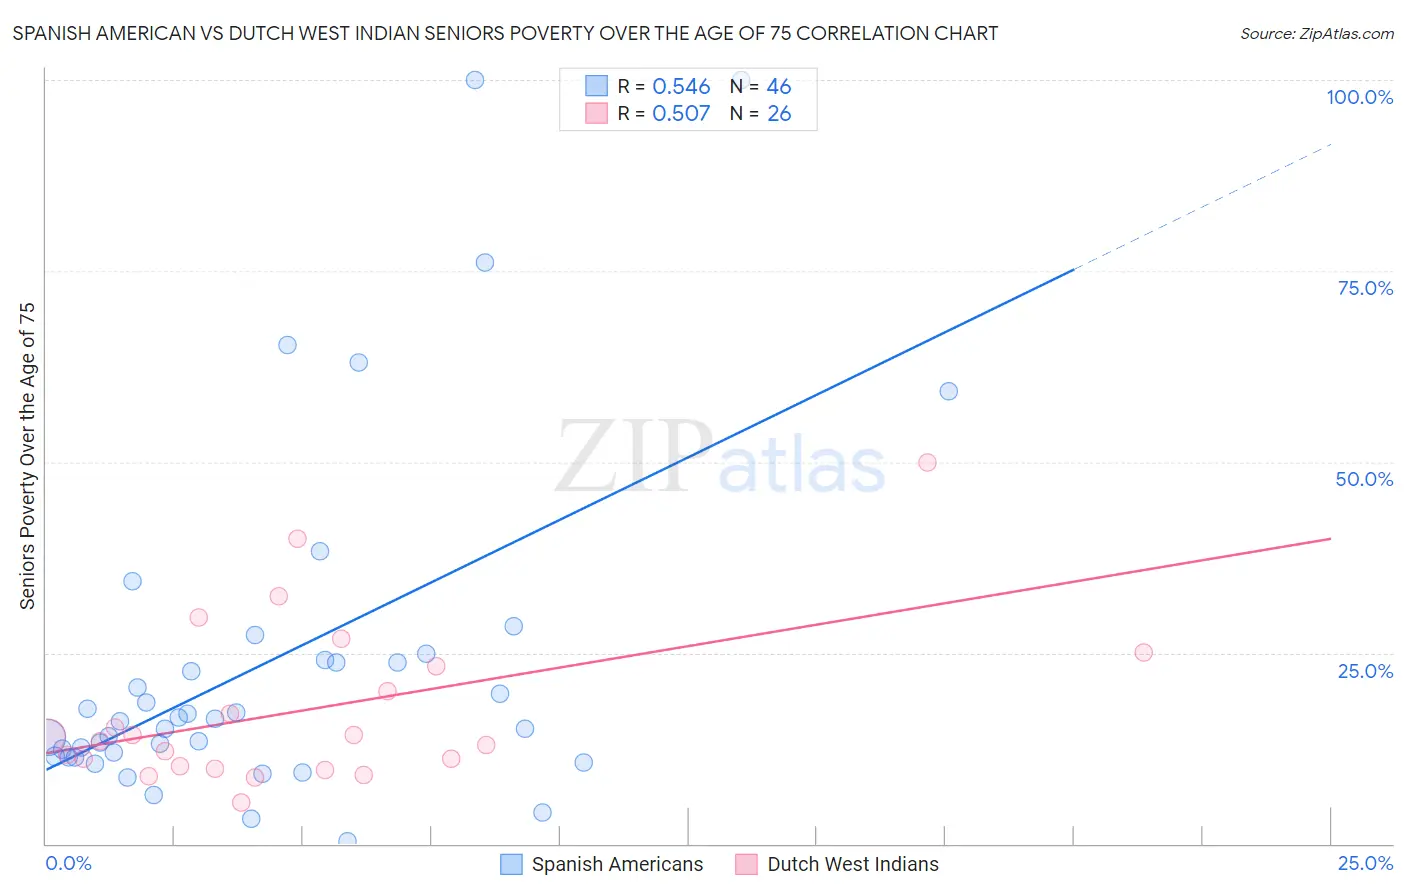 Spanish American vs Dutch West Indian Seniors Poverty Over the Age of 75